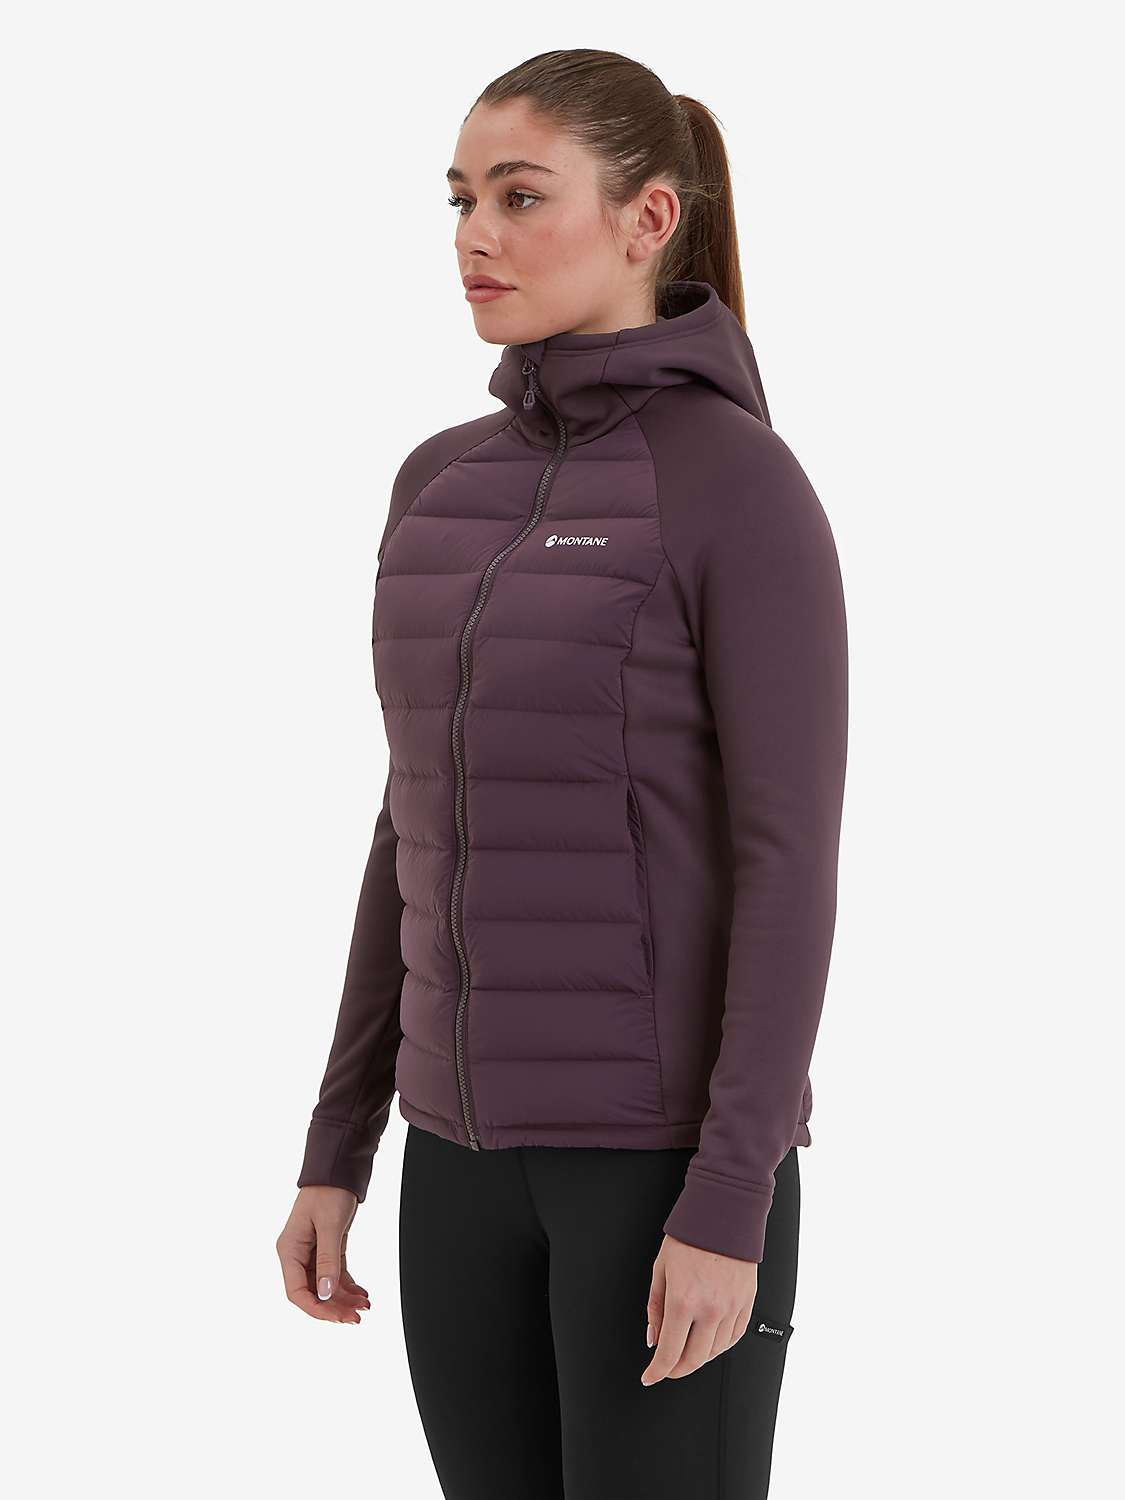 Buy Montane Composite Insulated Jacket Online at johnlewis.com